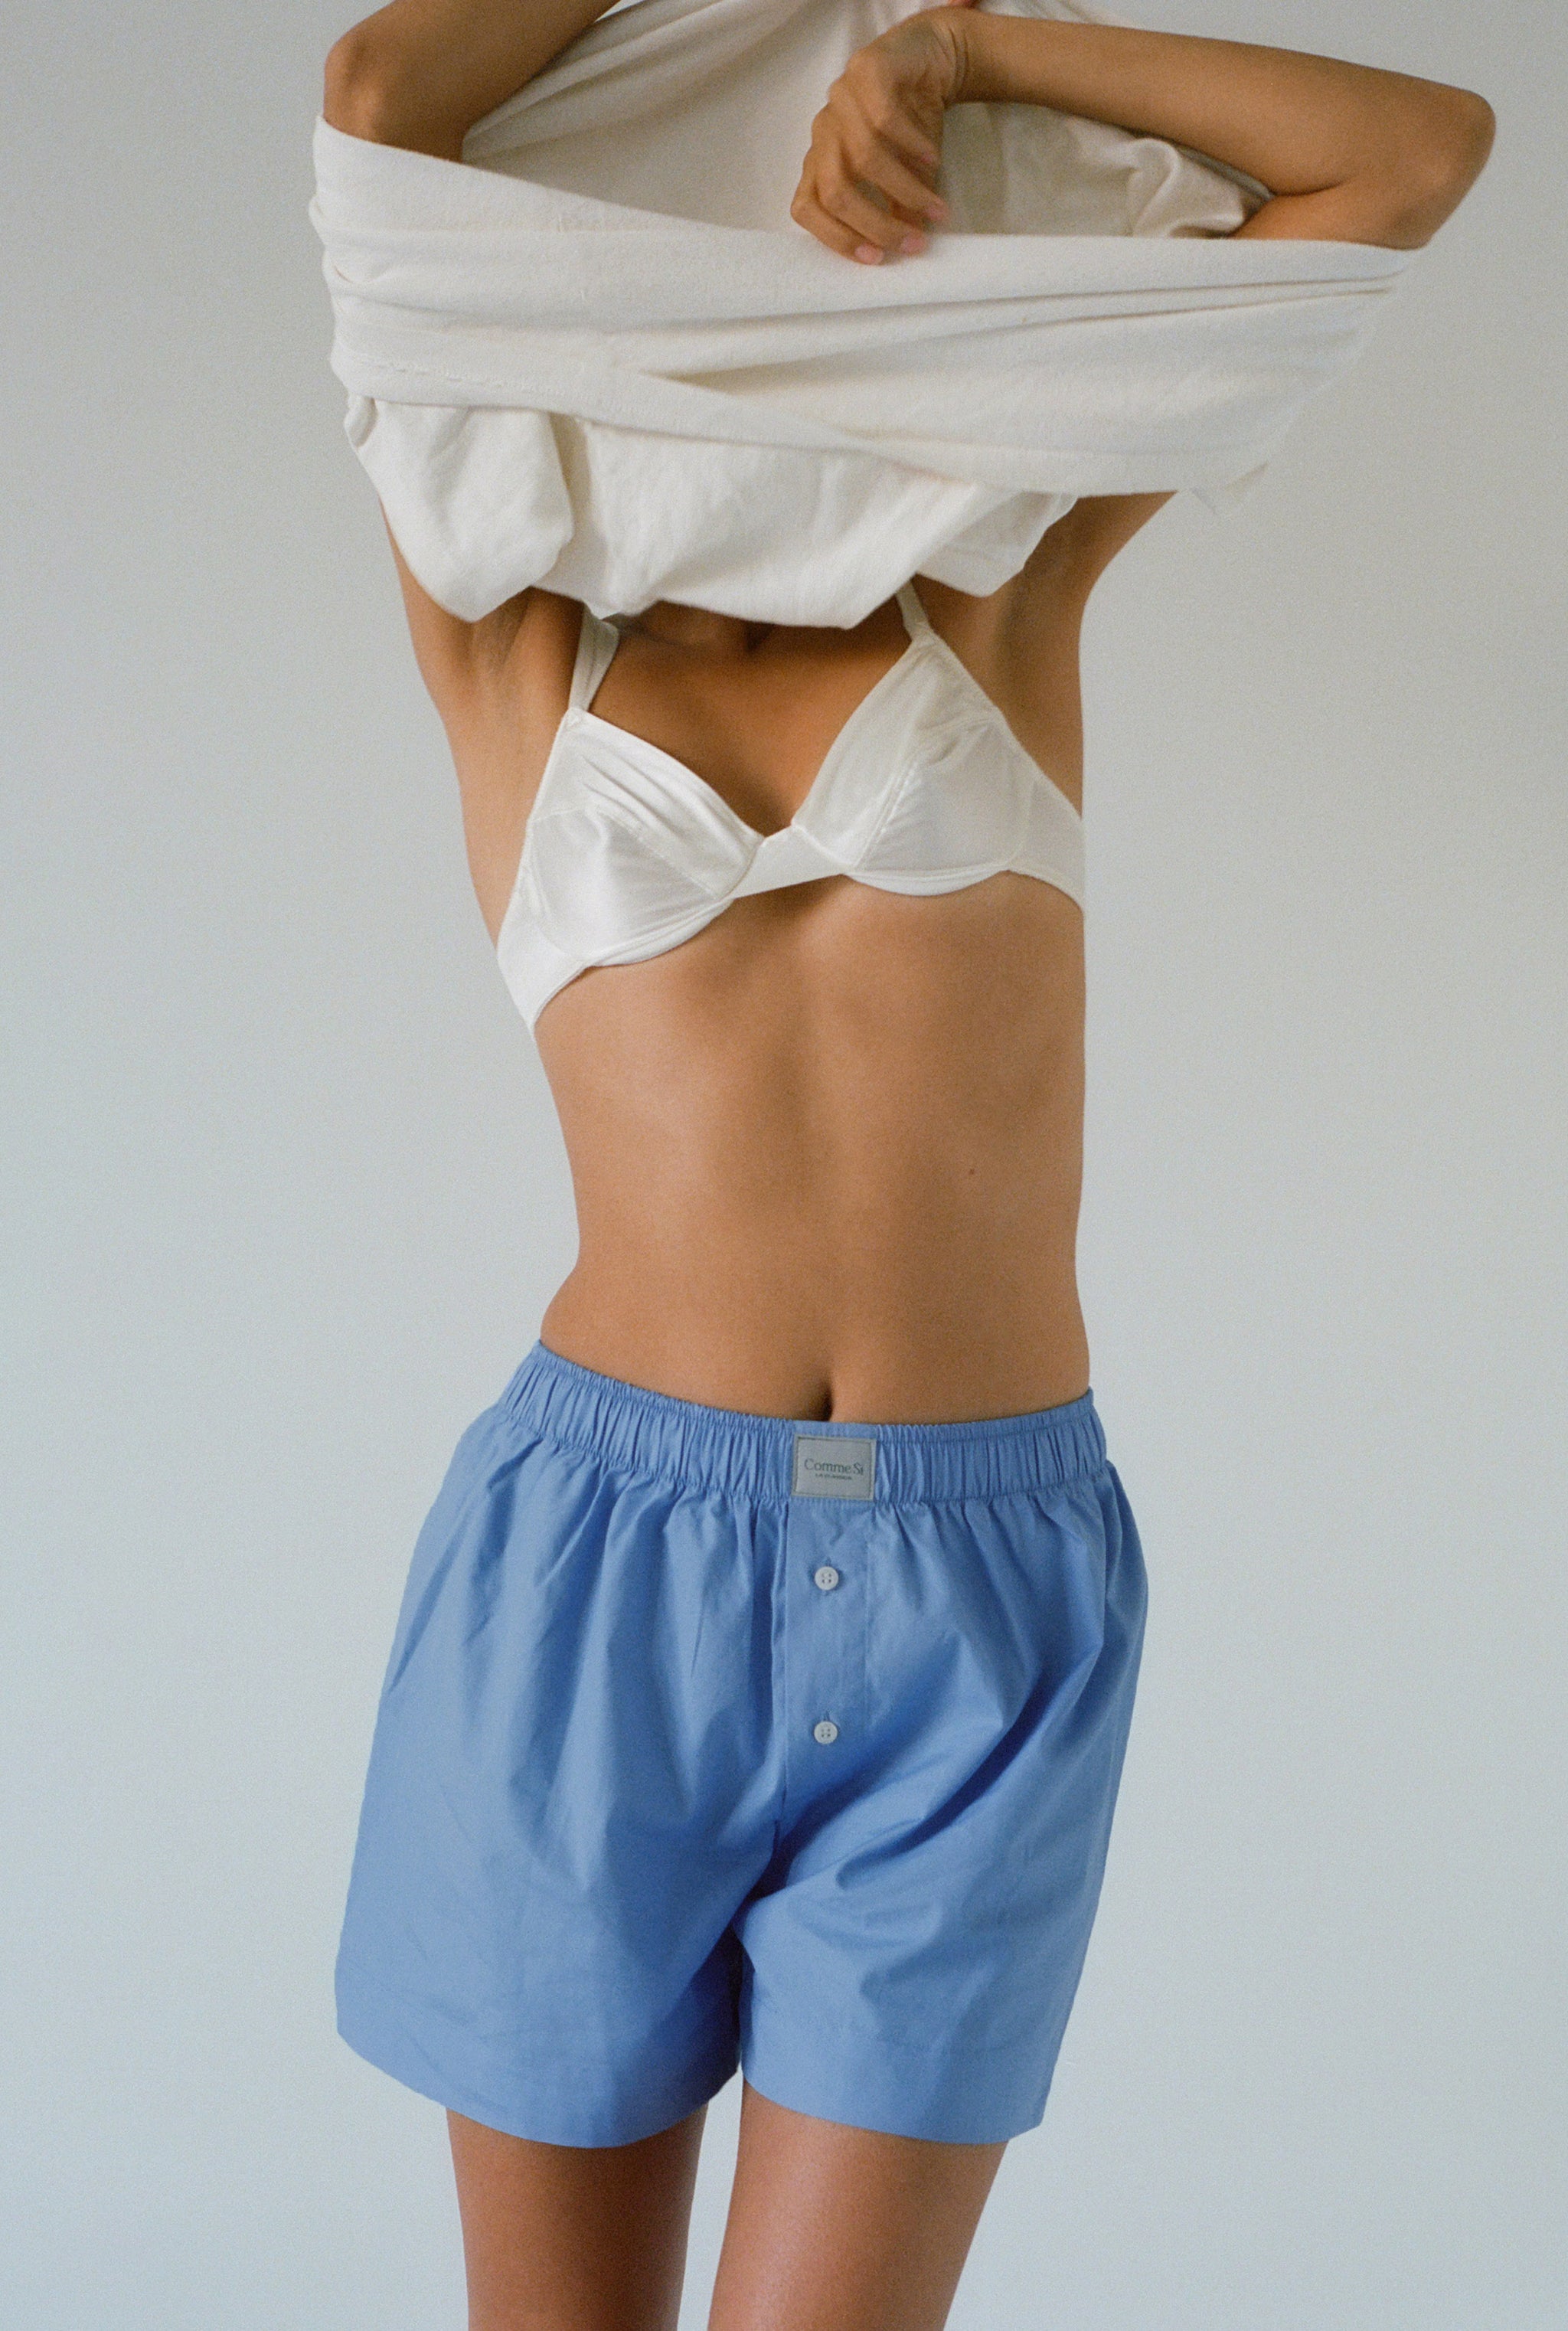 Daniela takes off her white tshirt while wearing La Boxer Classica in Grecian Blue